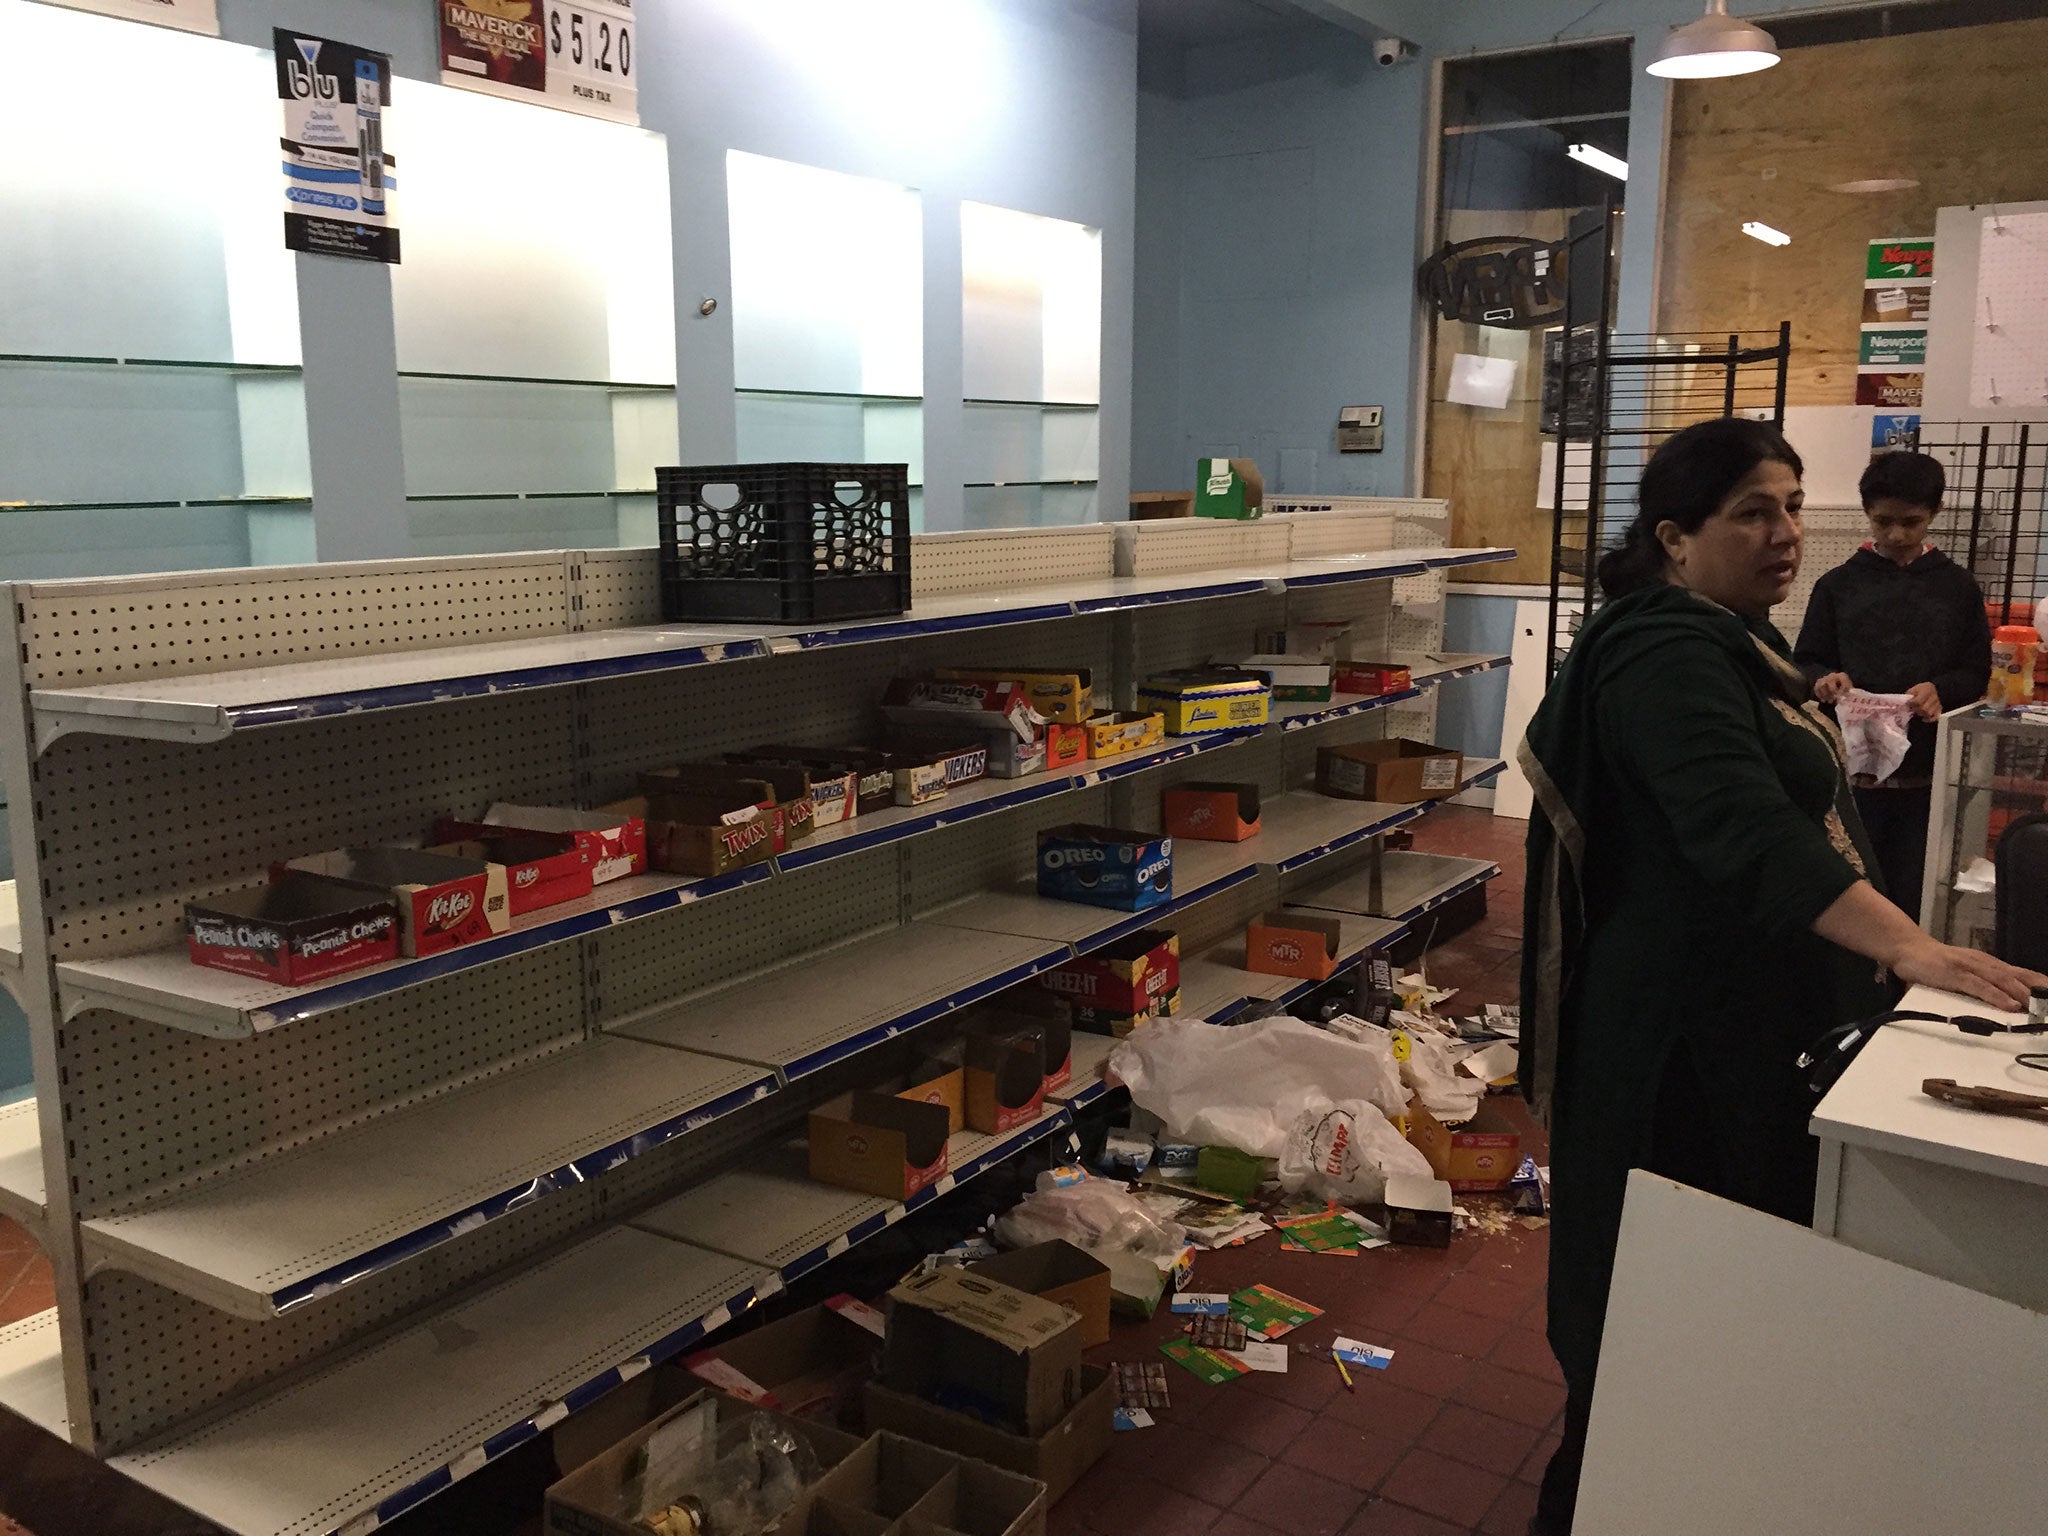 The Shaheed family assess the damage to their store in downtown Baltimore